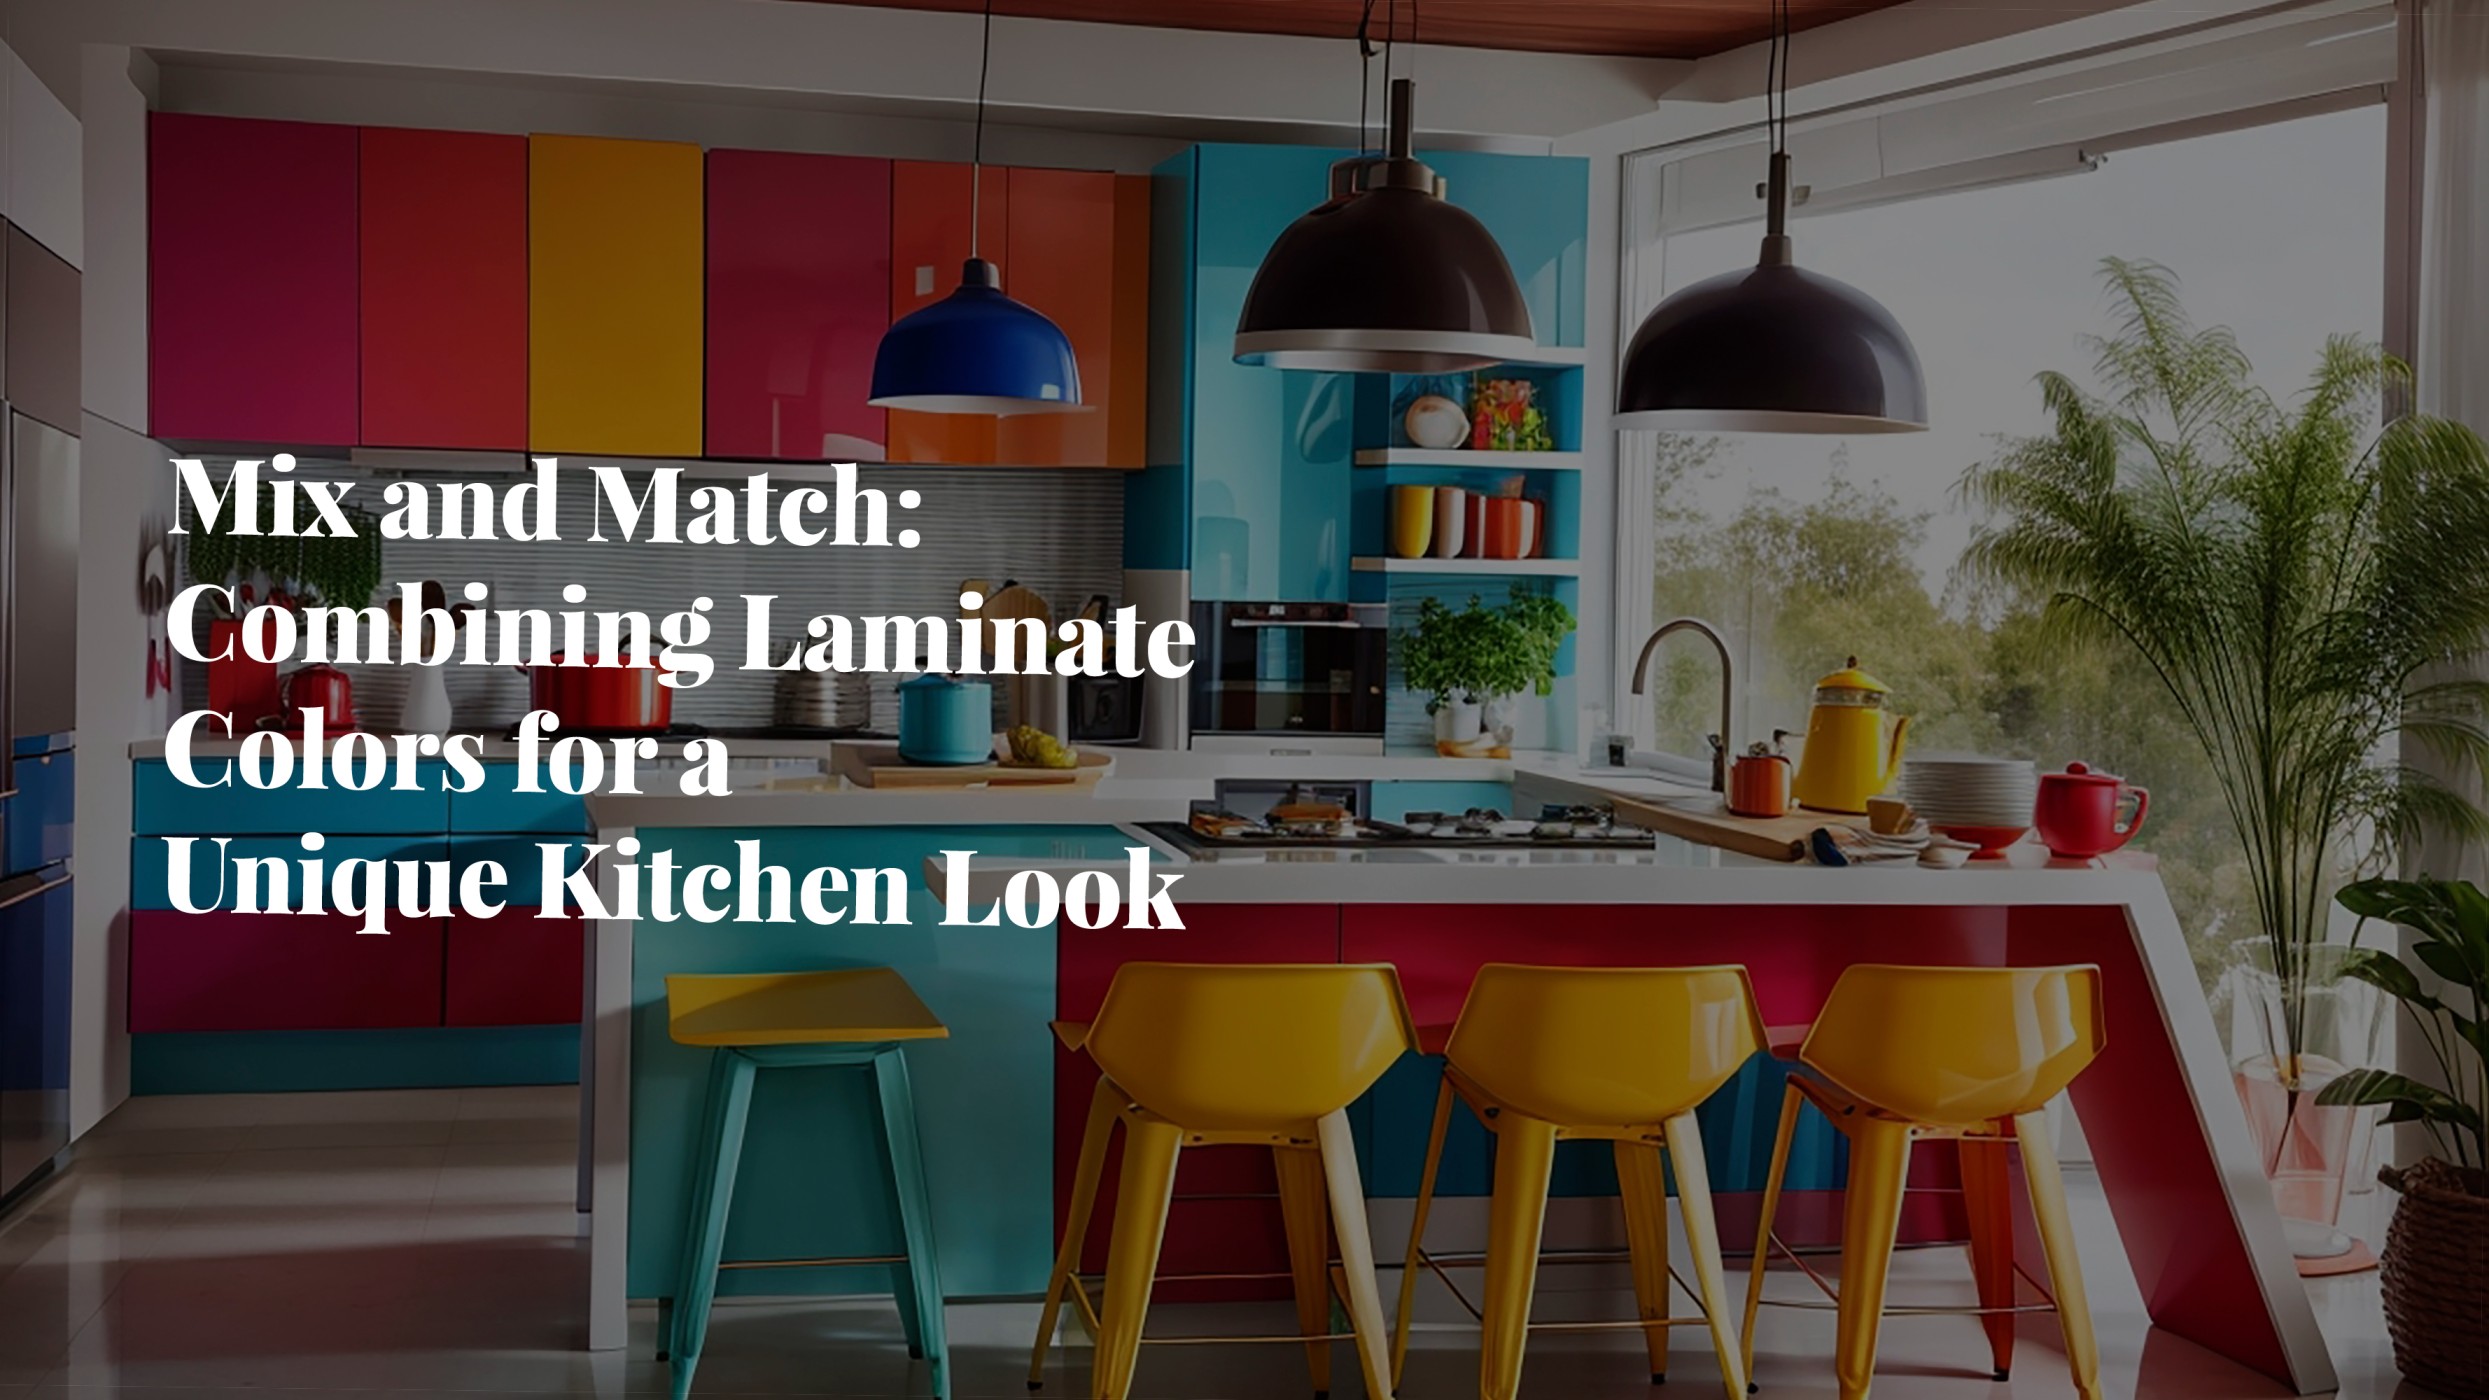 Mix and Match: Combining Laminate Colors for a Unique Kitchen Look